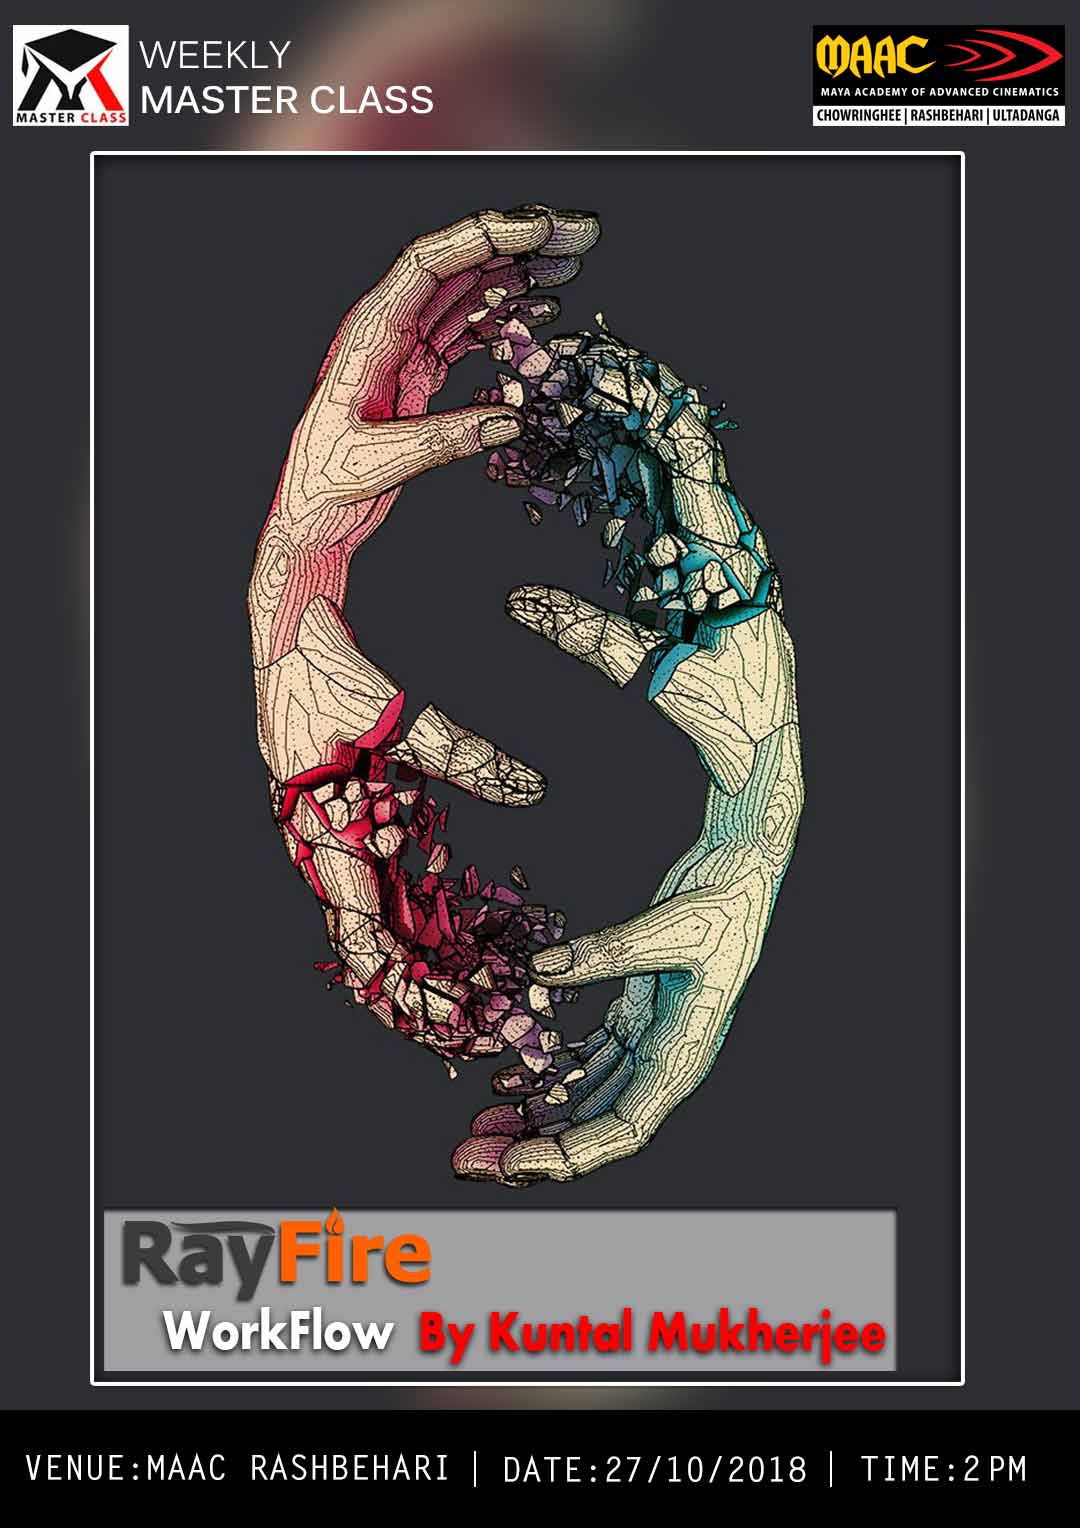 Weekly Master Class on RayFire Workflow